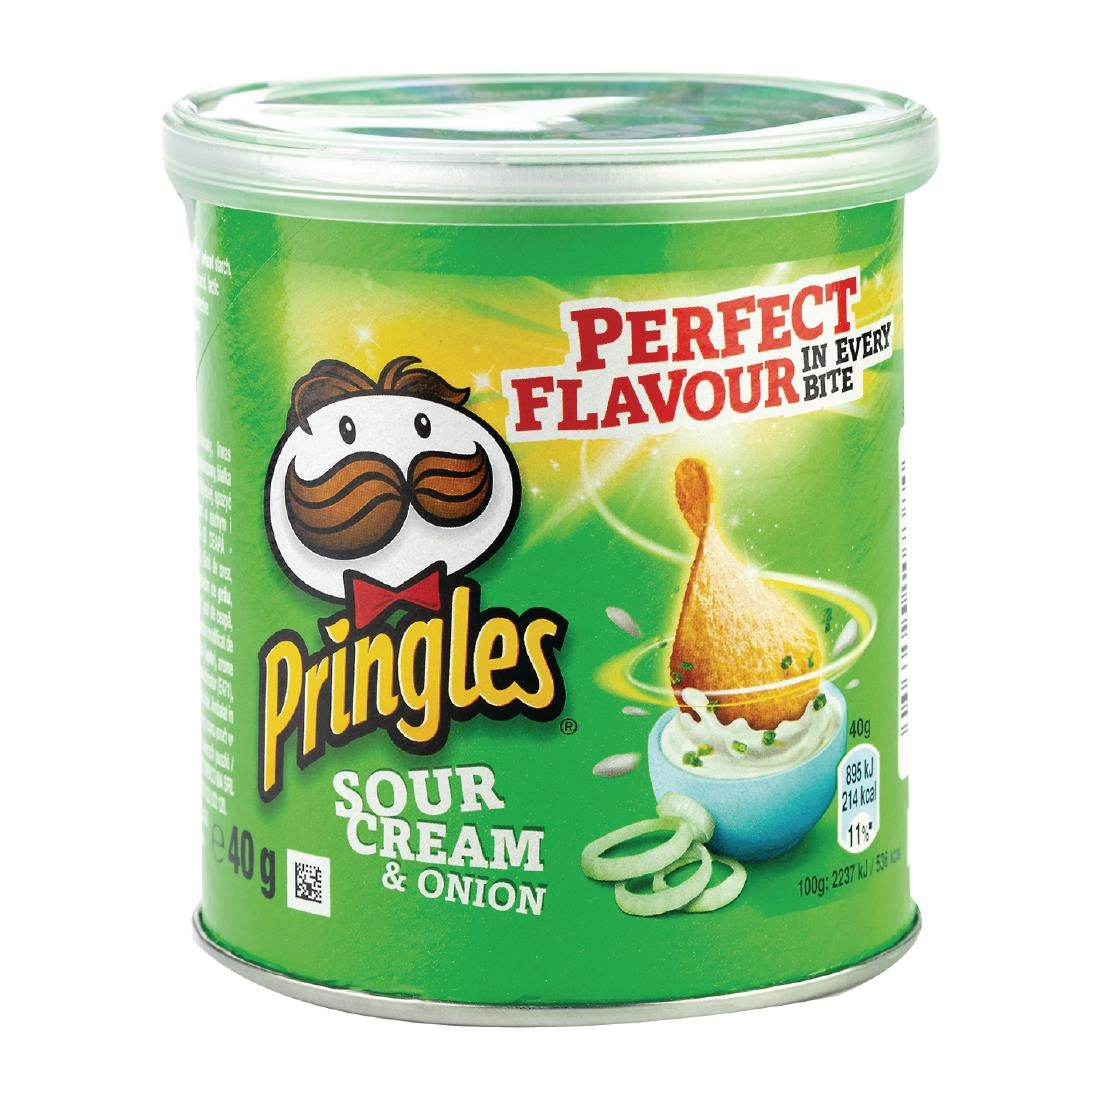 FW846 Pringles Sour Cream 40g (Pack of 12) JD Catering Equipment Solutions Ltd